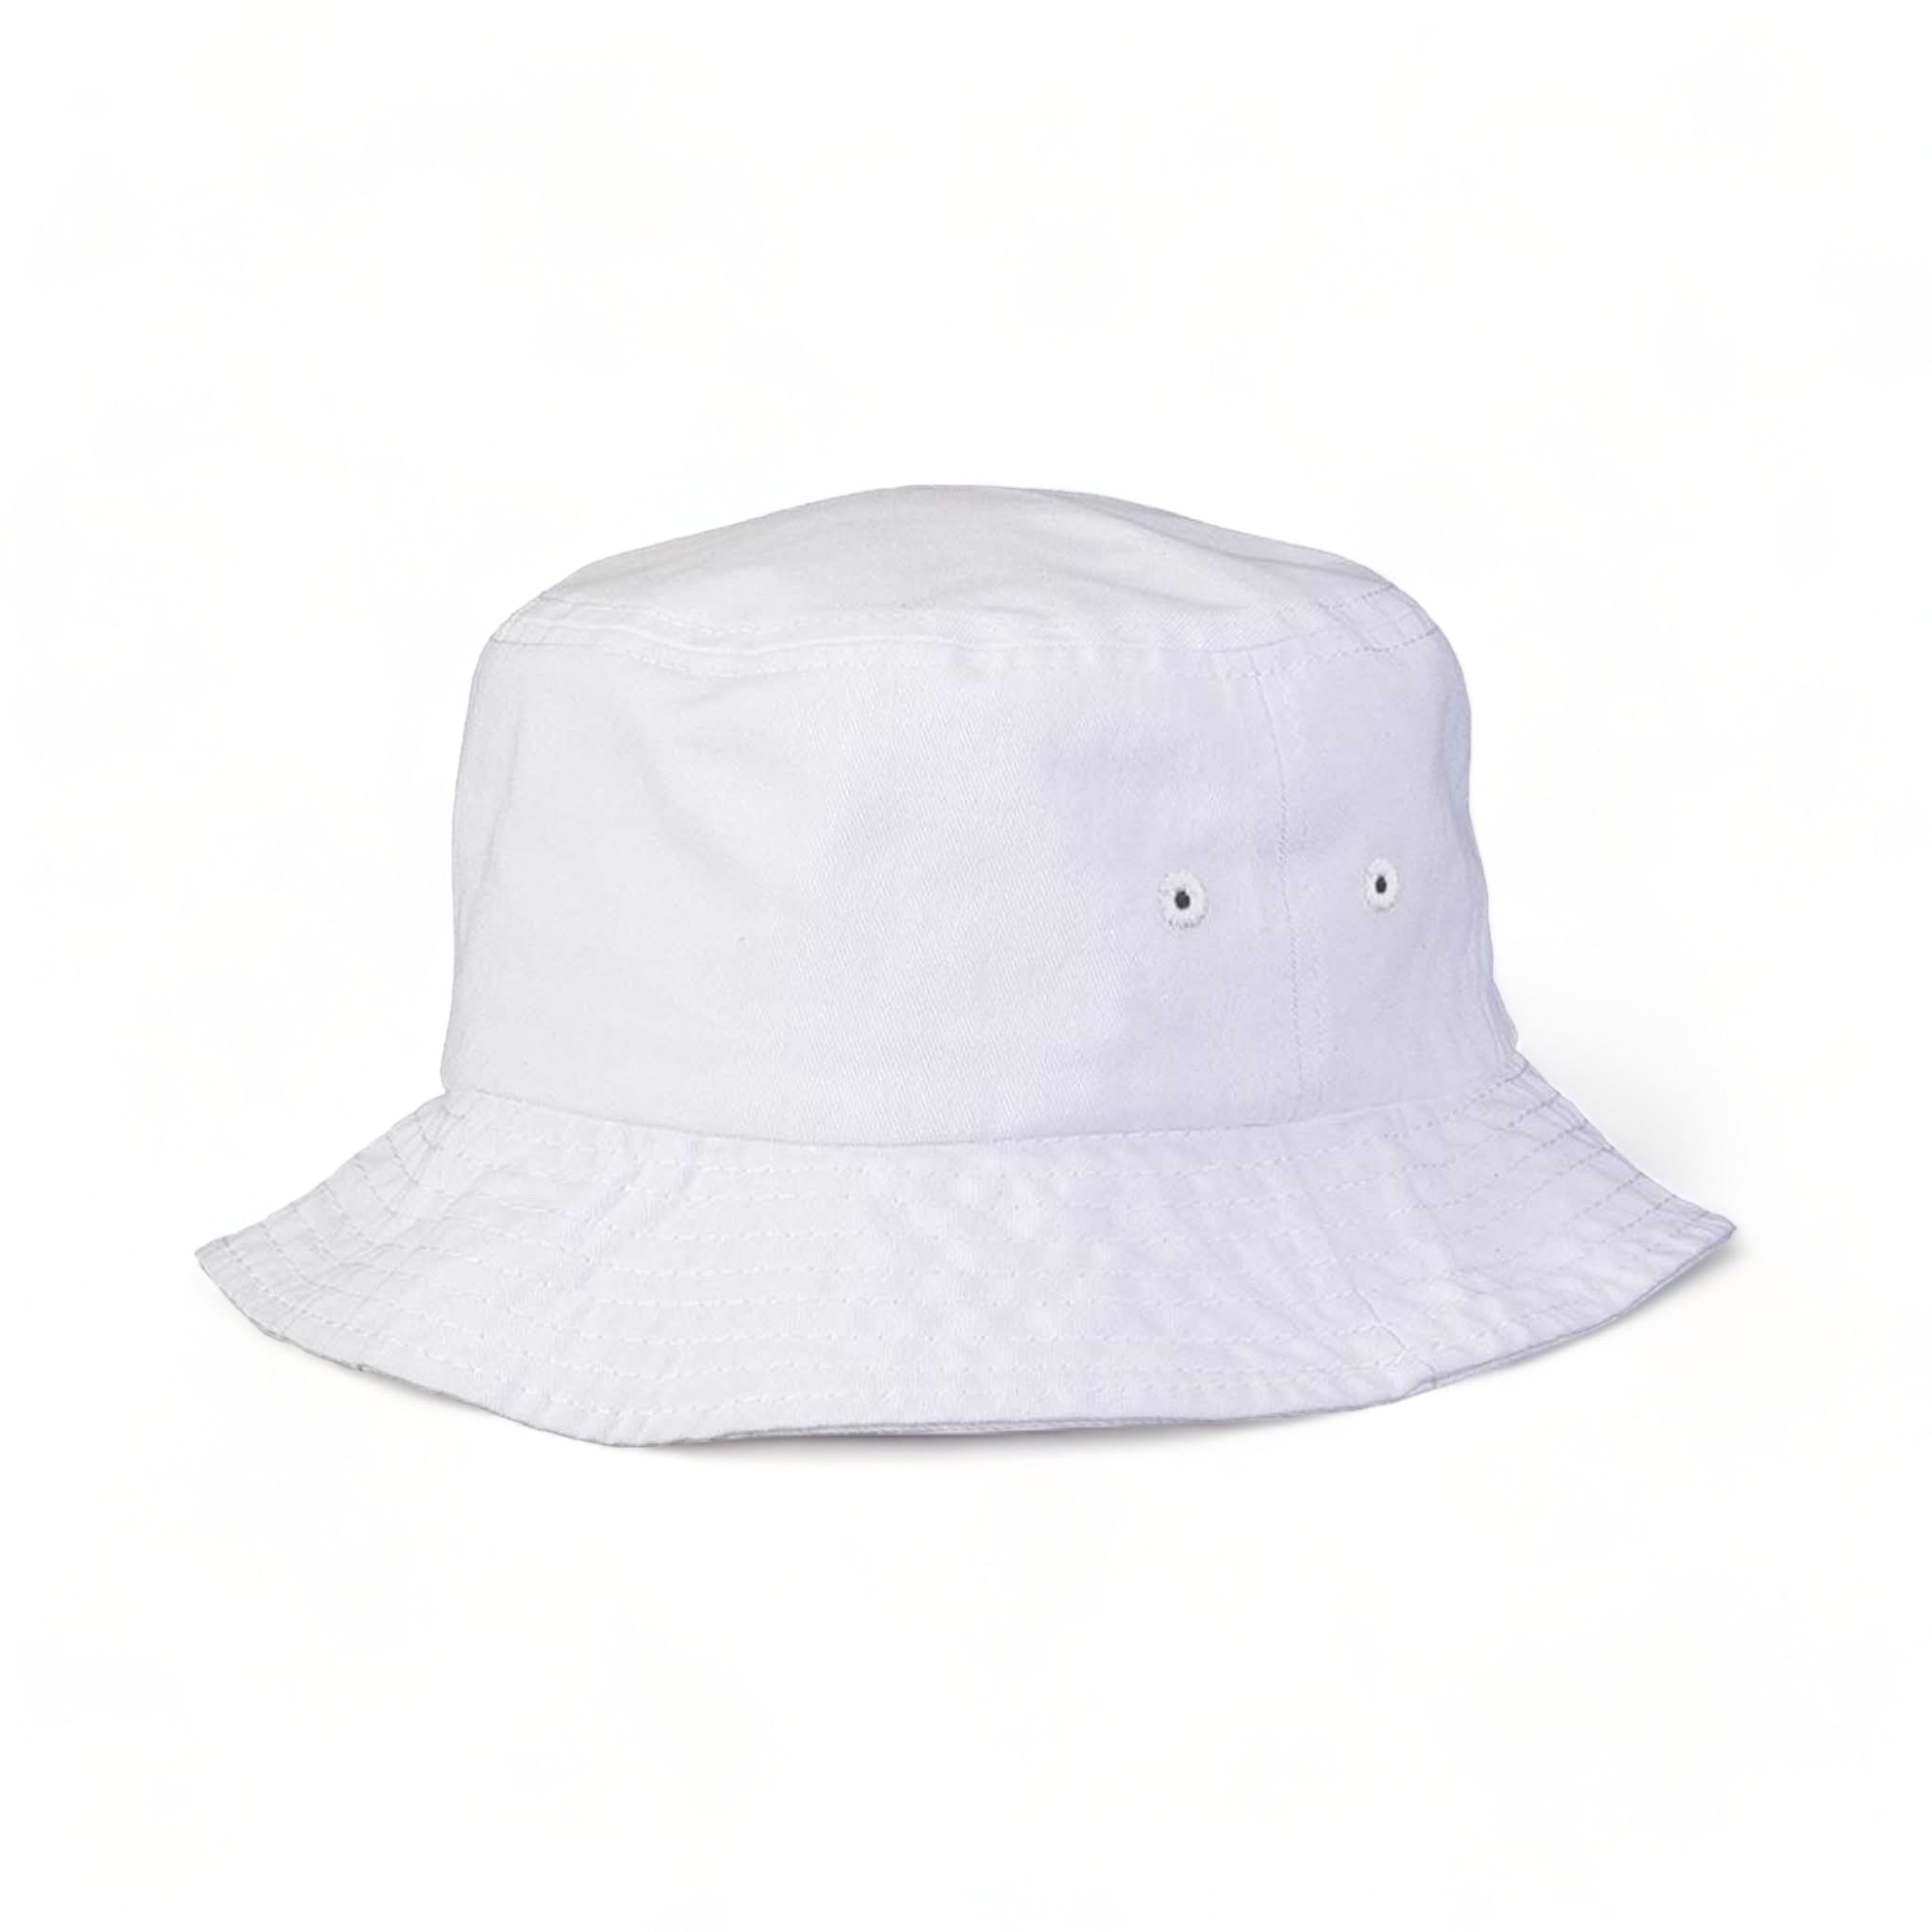 Front view of Sportsman 2050 custom hat in white